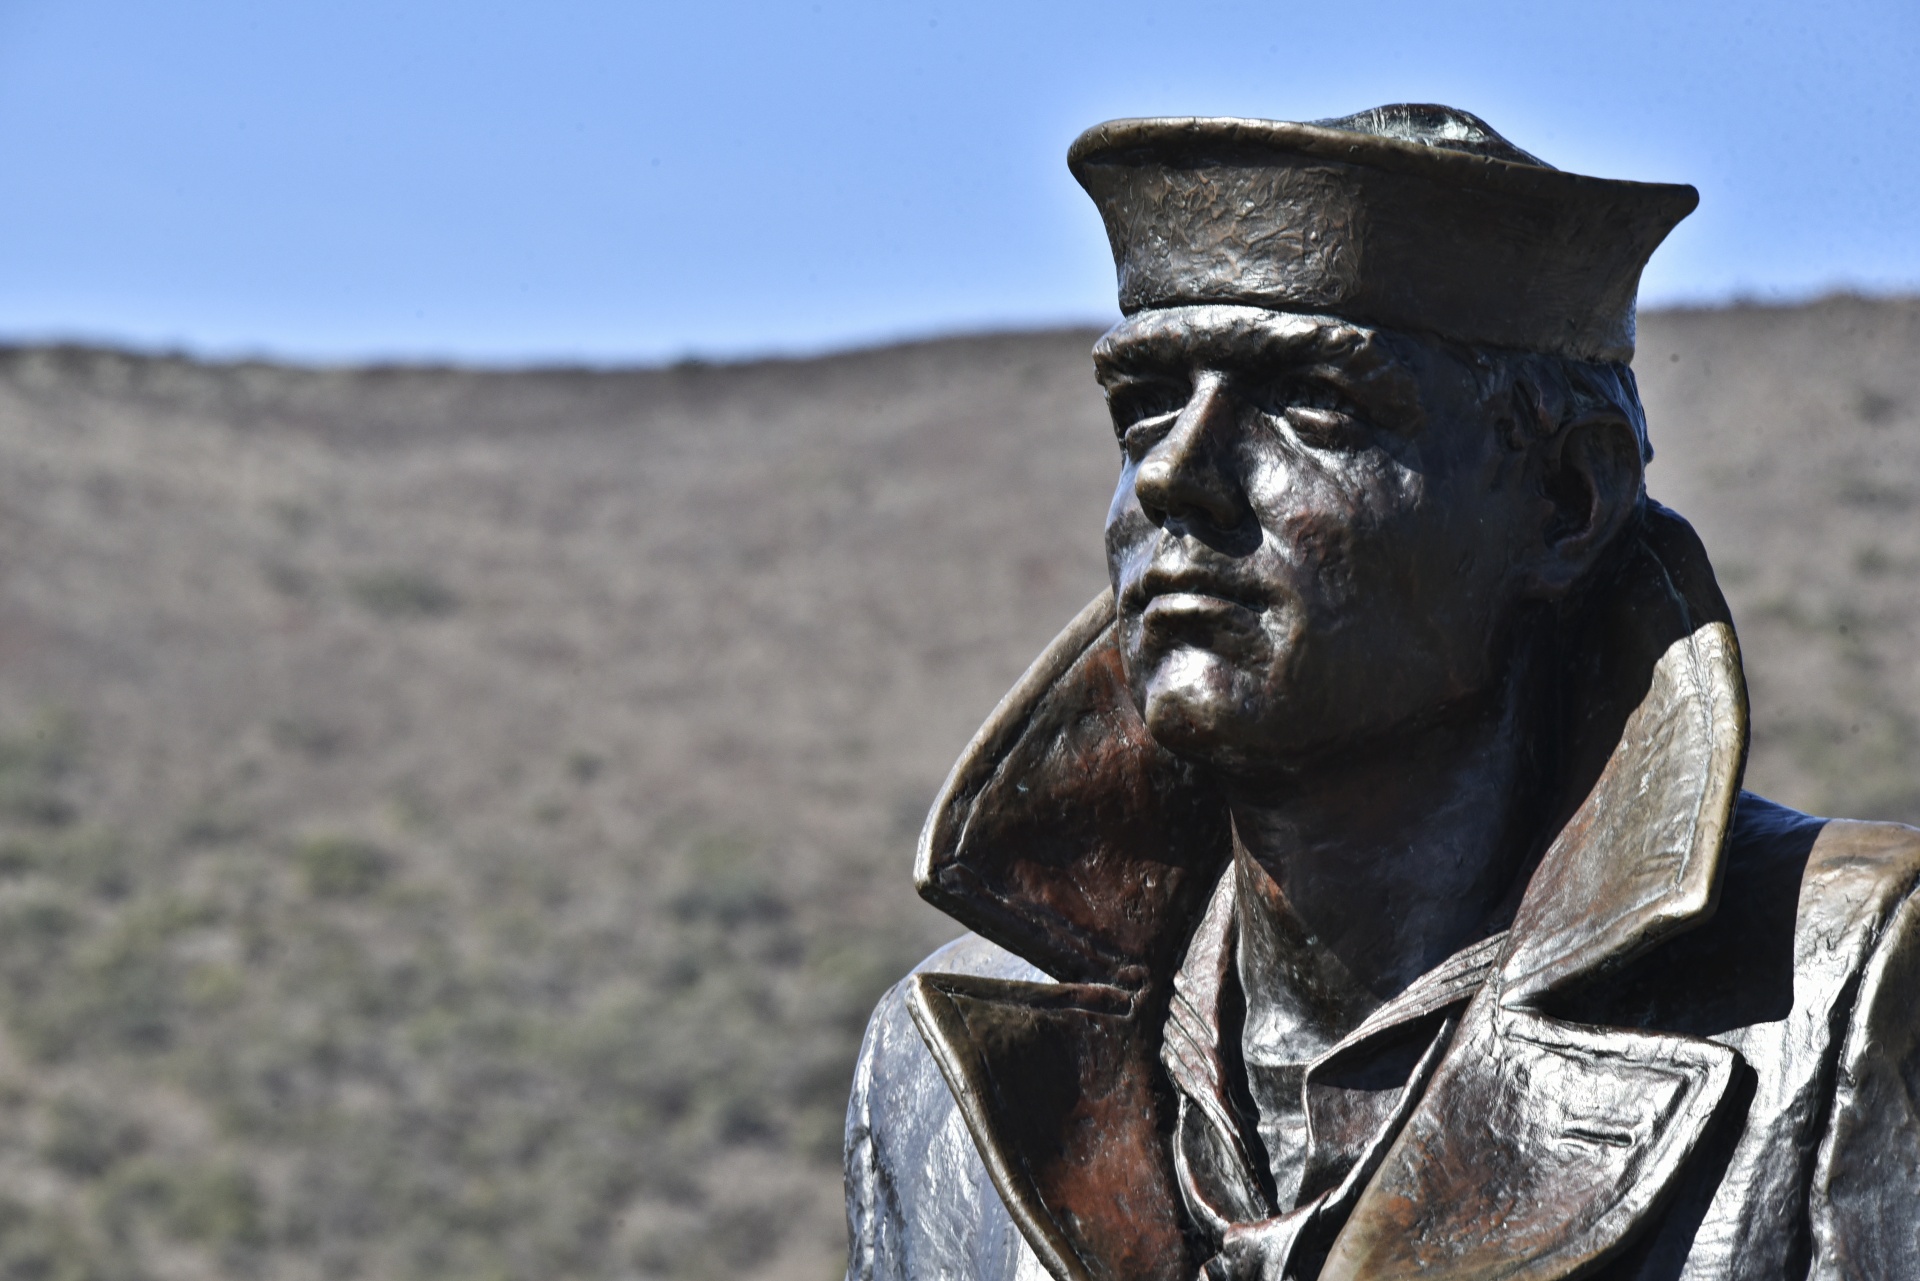 Closeup of the face of the Lone Soldier statue